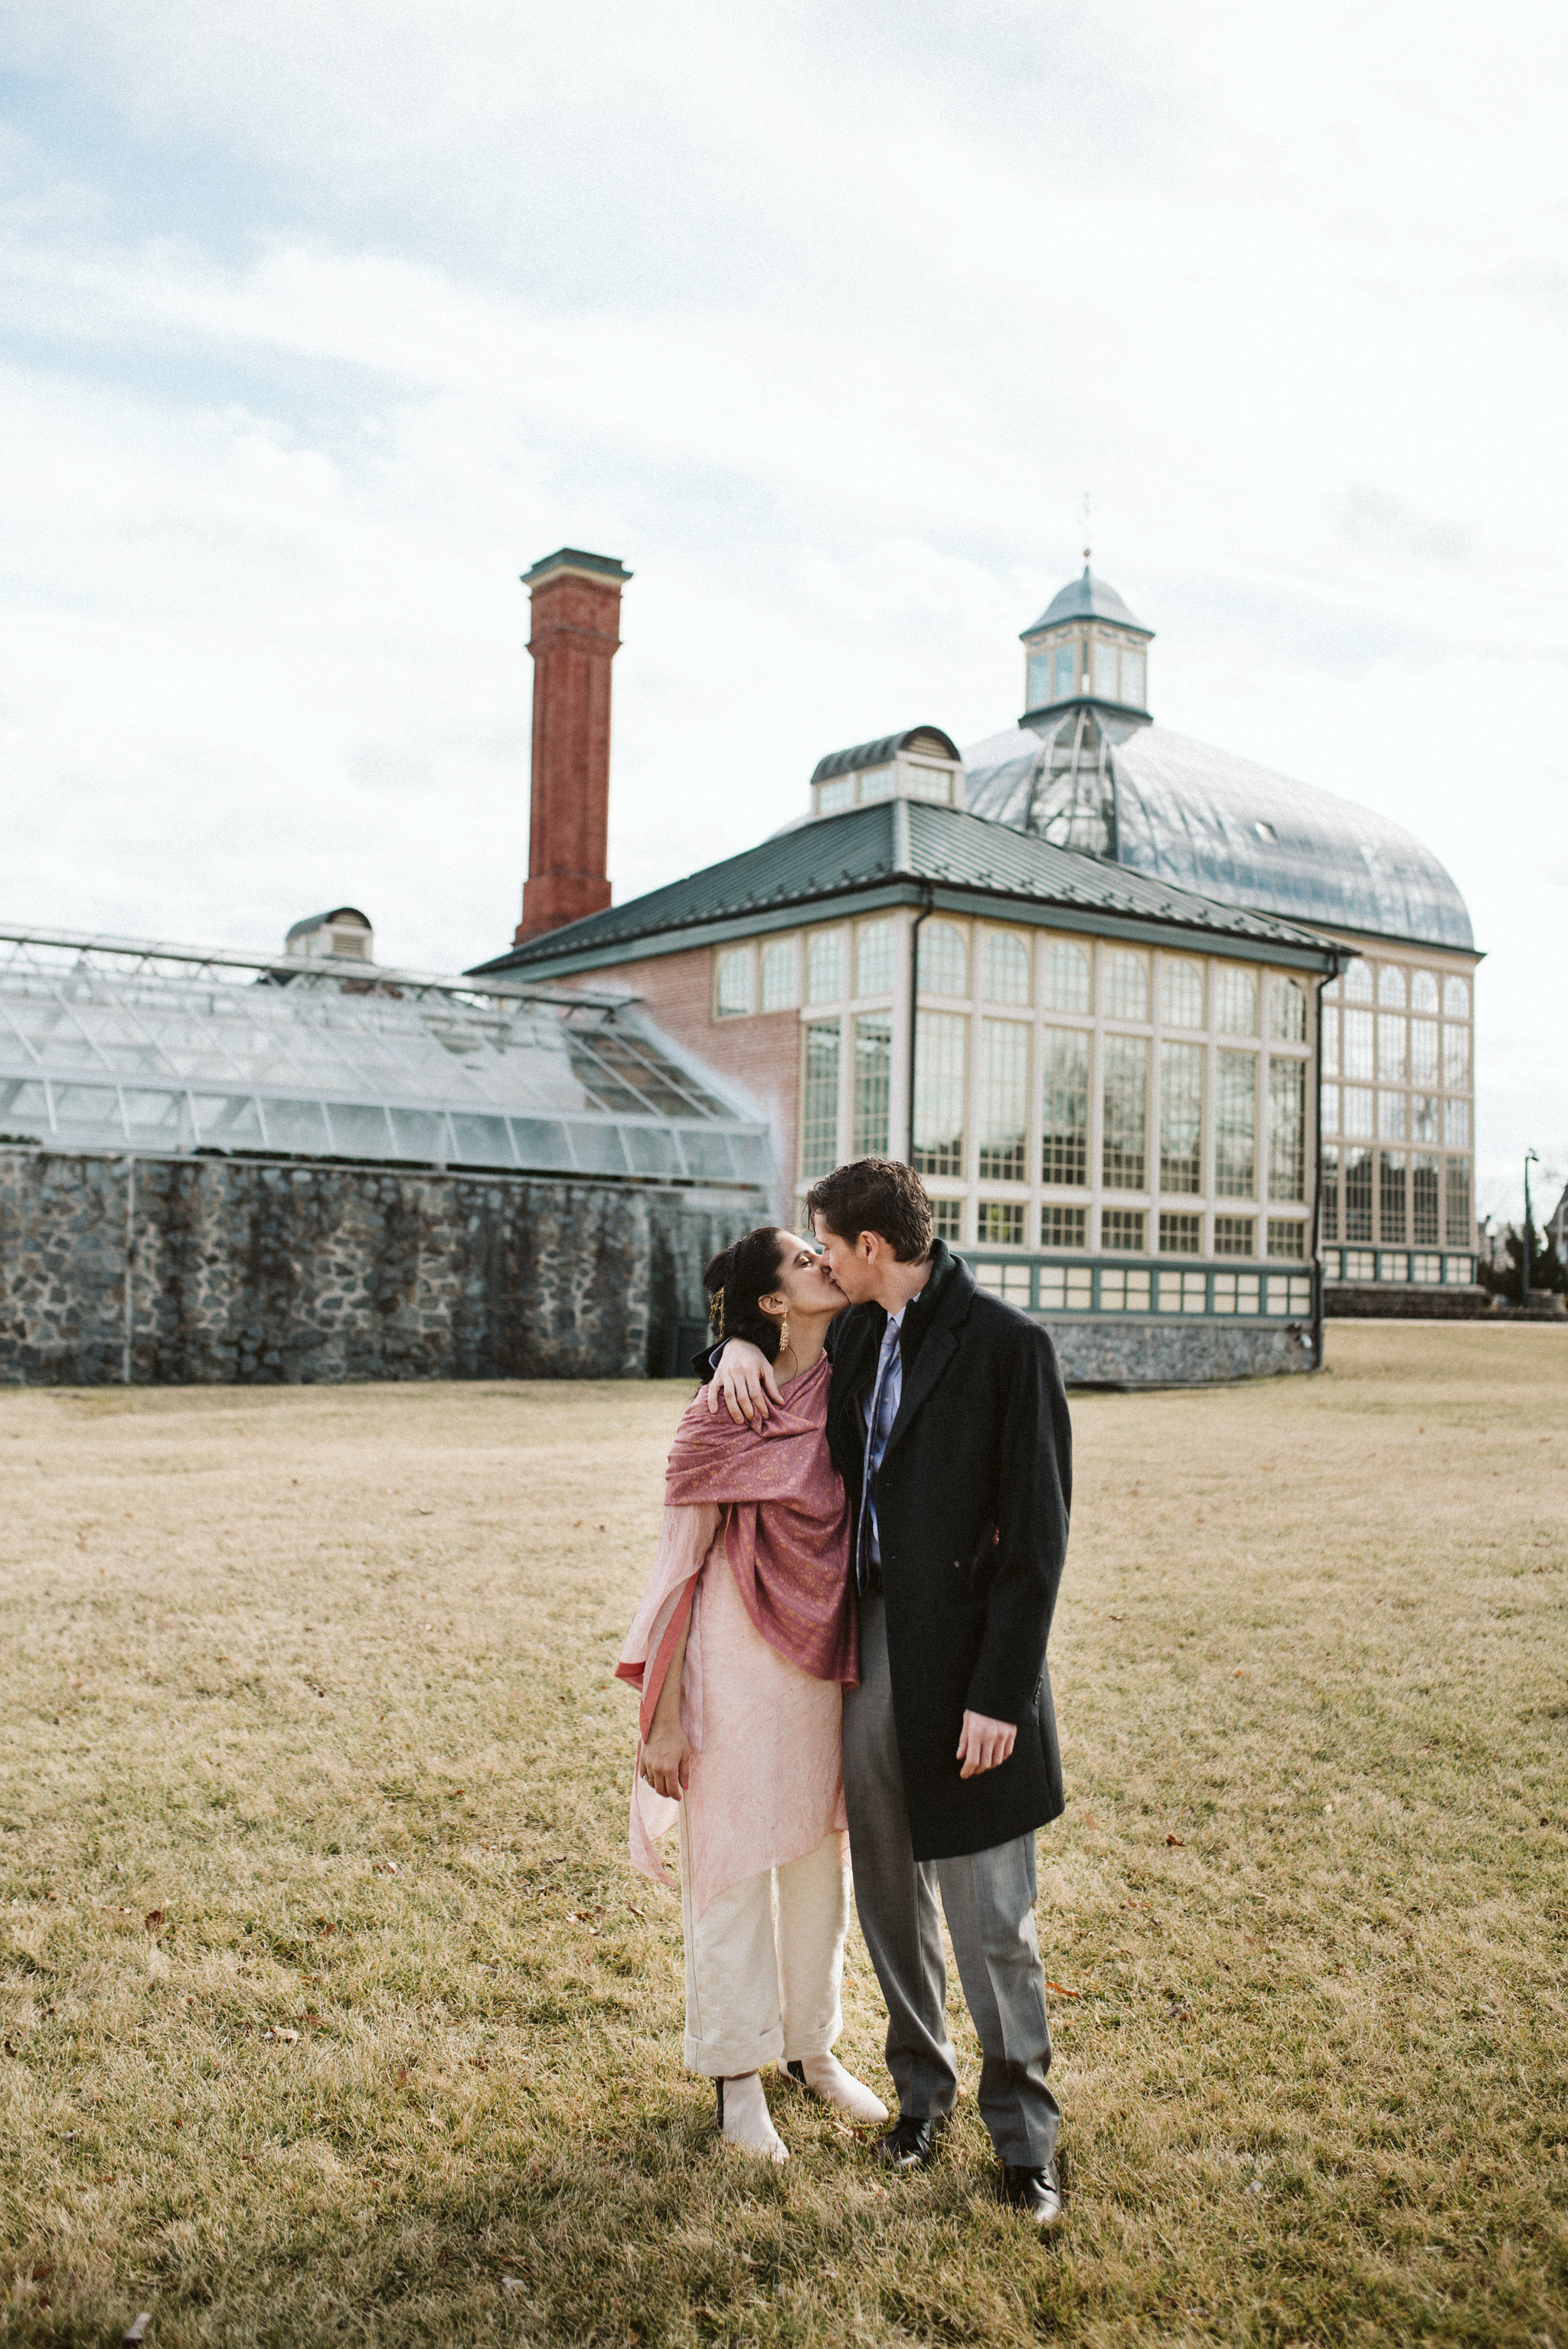 Elopement, Weekday Wedding, Towson, Rawlings Conservatory, Greenhouse, Maryland Wedding Photographer, Indian American, Outdoor, Nature, Romantic, Bride and Groom, Kiss